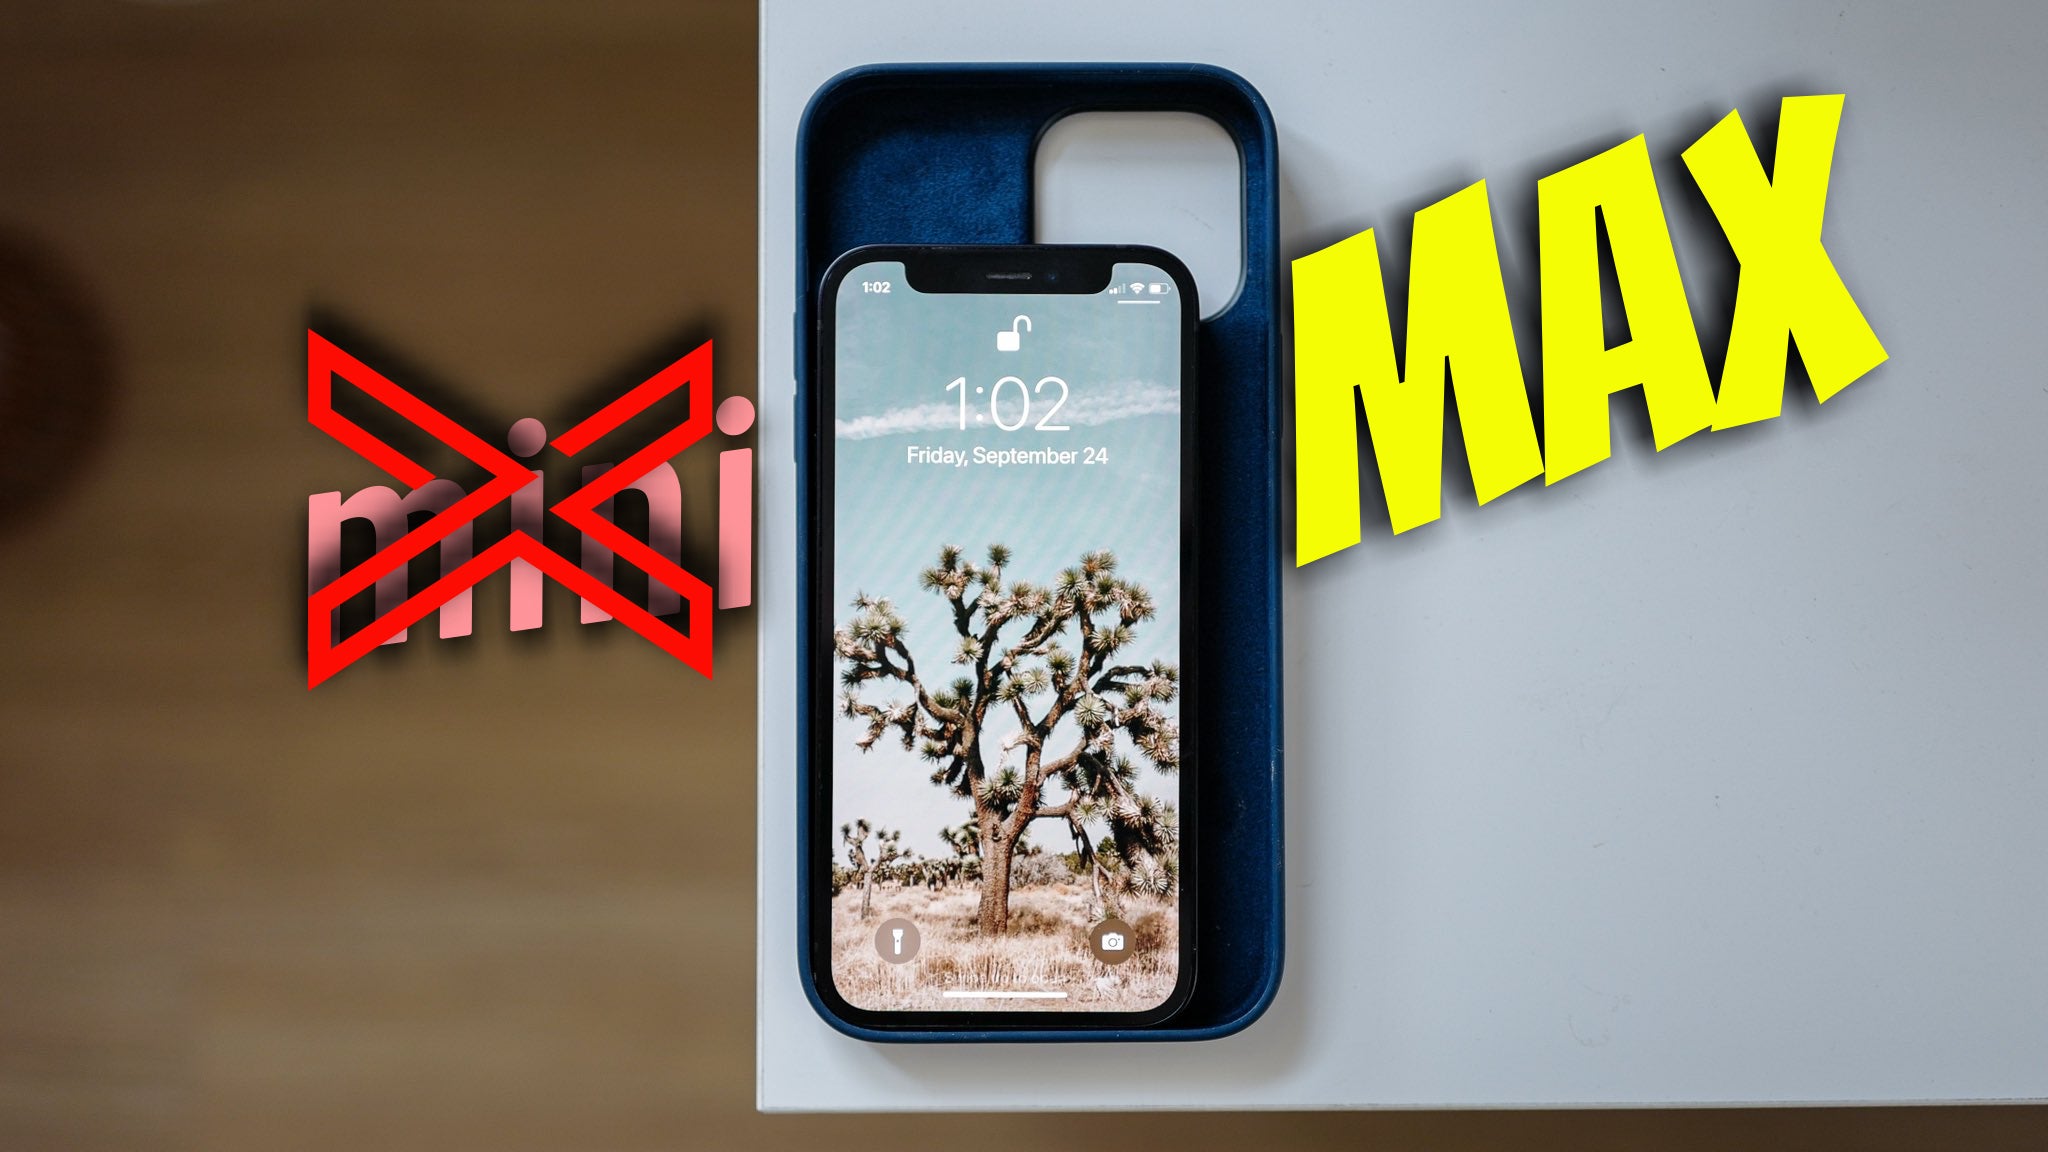 iPhone 15 Pro Max vs iPhone 12 Pro Max: is it time for an upgrade? -  PhoneArena